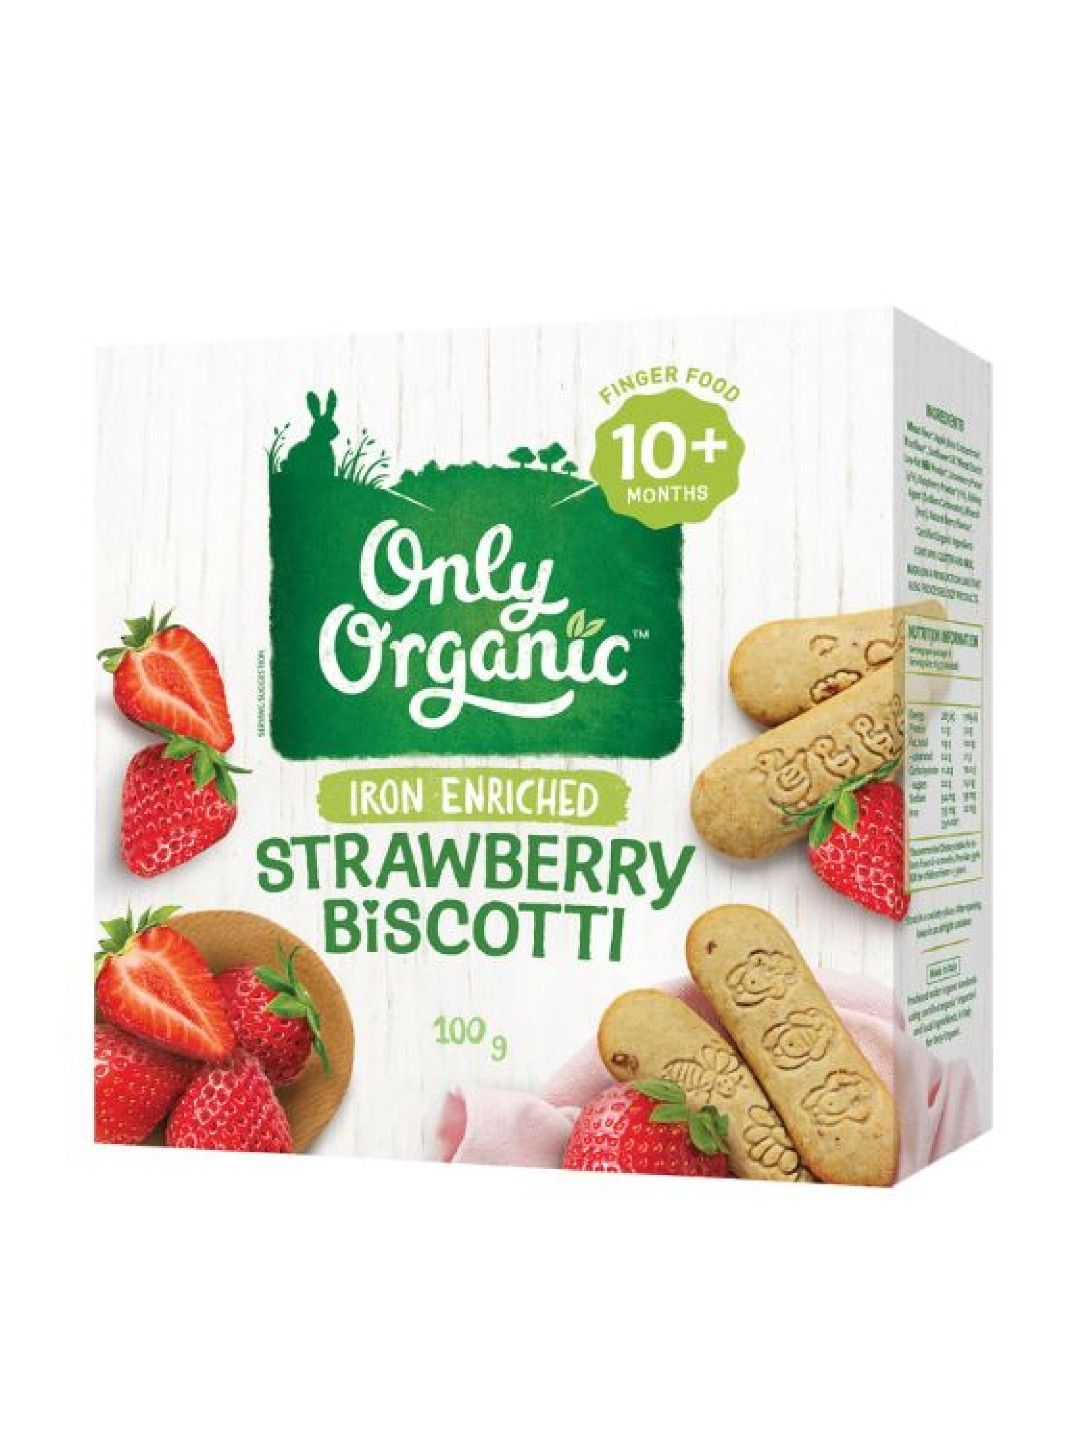 Only Organic Strawberry Biscotti (10+ mos) 100g (No Color- Image 1)